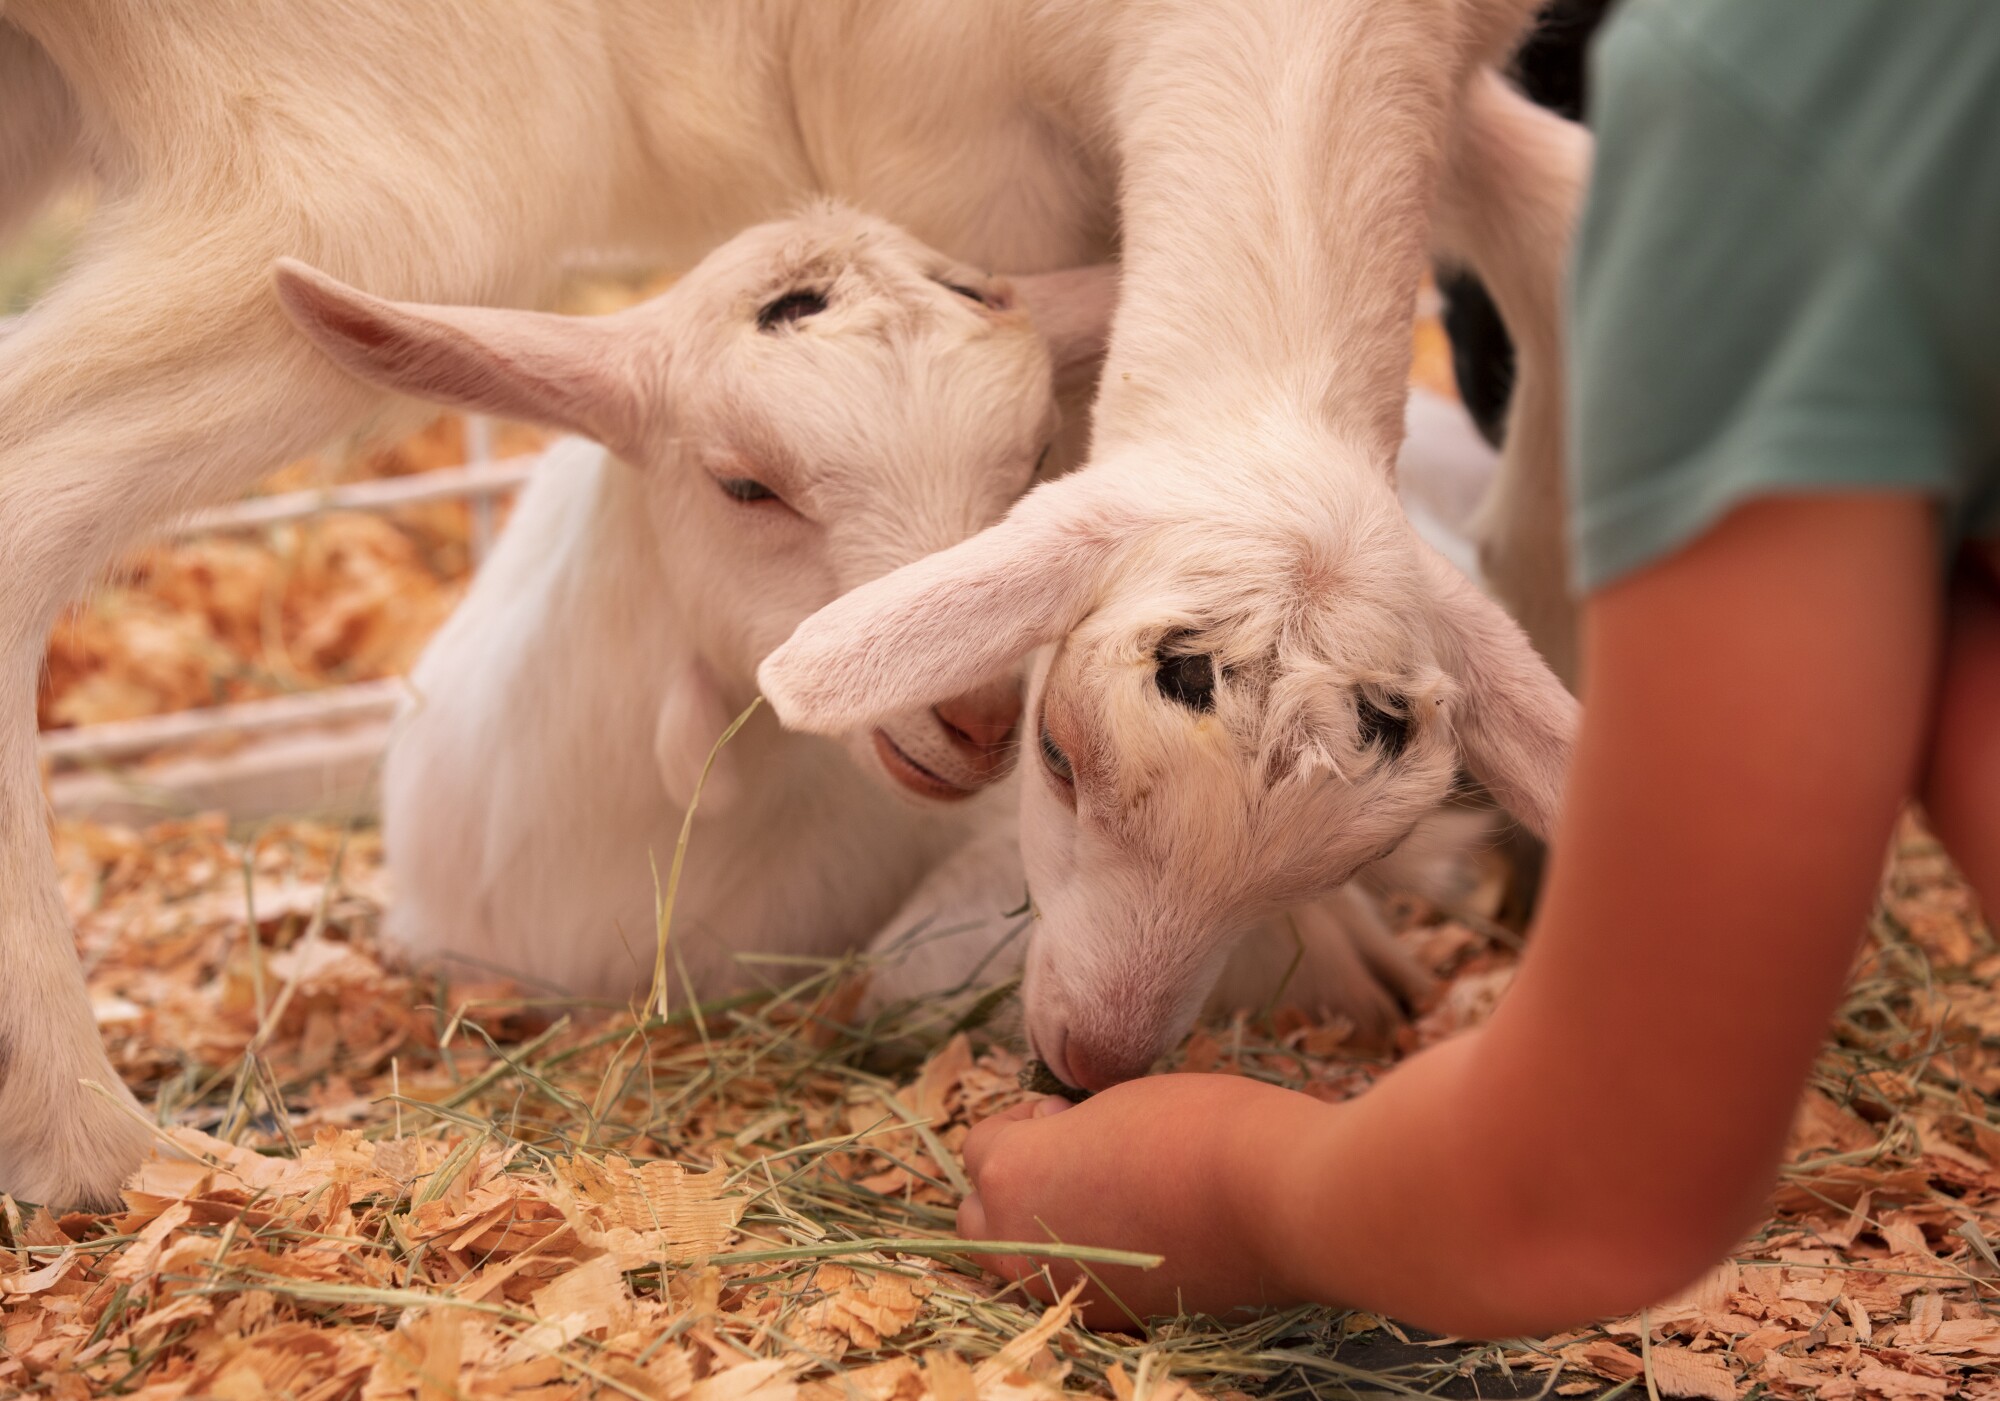 A child feeds goats in a petting zoo at the San Diego County Fair on Wednesday, June 15, 2022 in Del Mar, California.